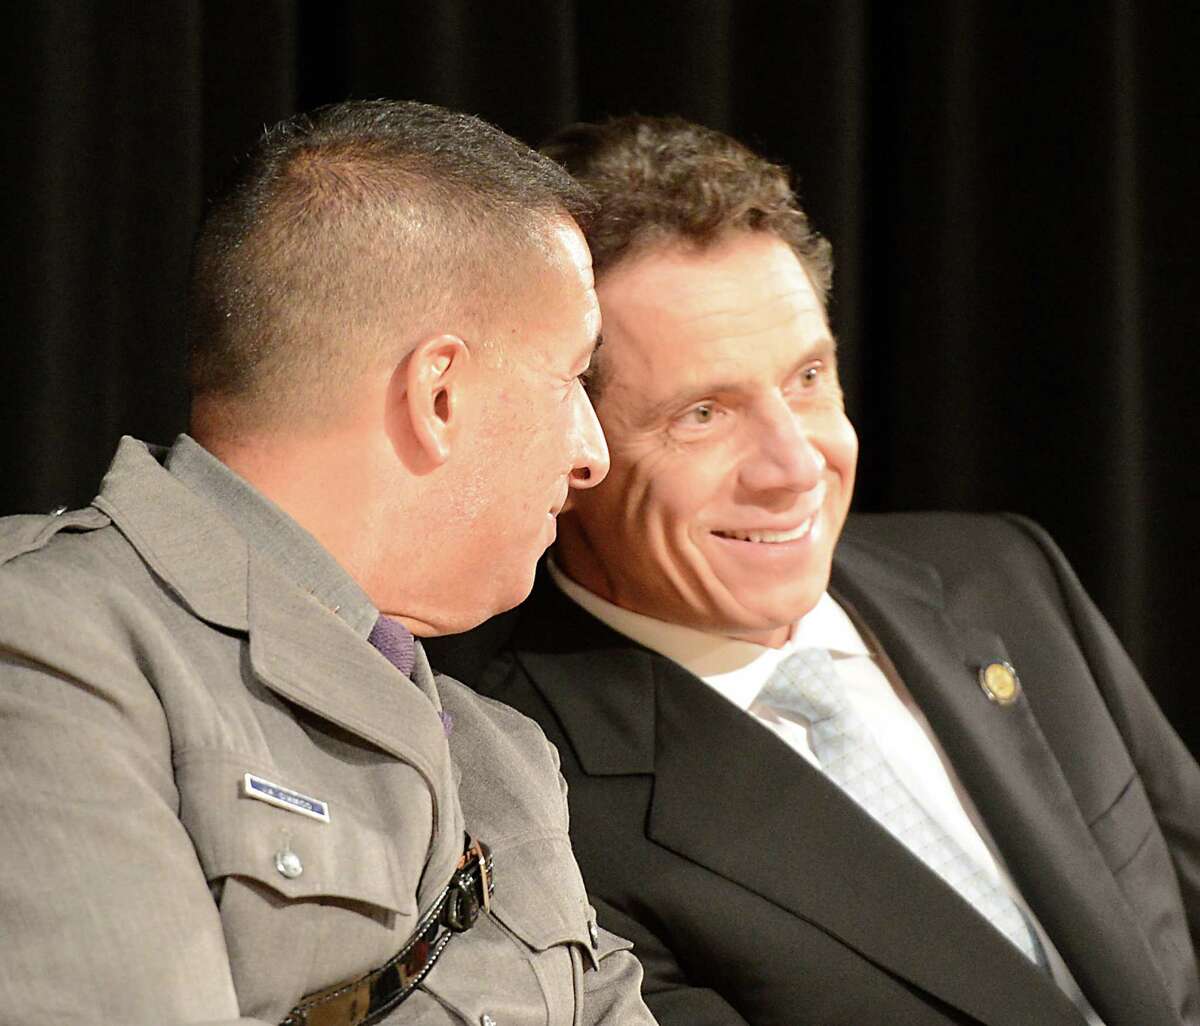 Superintendent Joseph D'Amico, left speaks with Governor Andrew Cuomo at the New York State Police Graduation at the Empire State Plaza Convention Center in Albany, N.Y. Oct 16, 2012. (Skip Dickstein/Times Union)